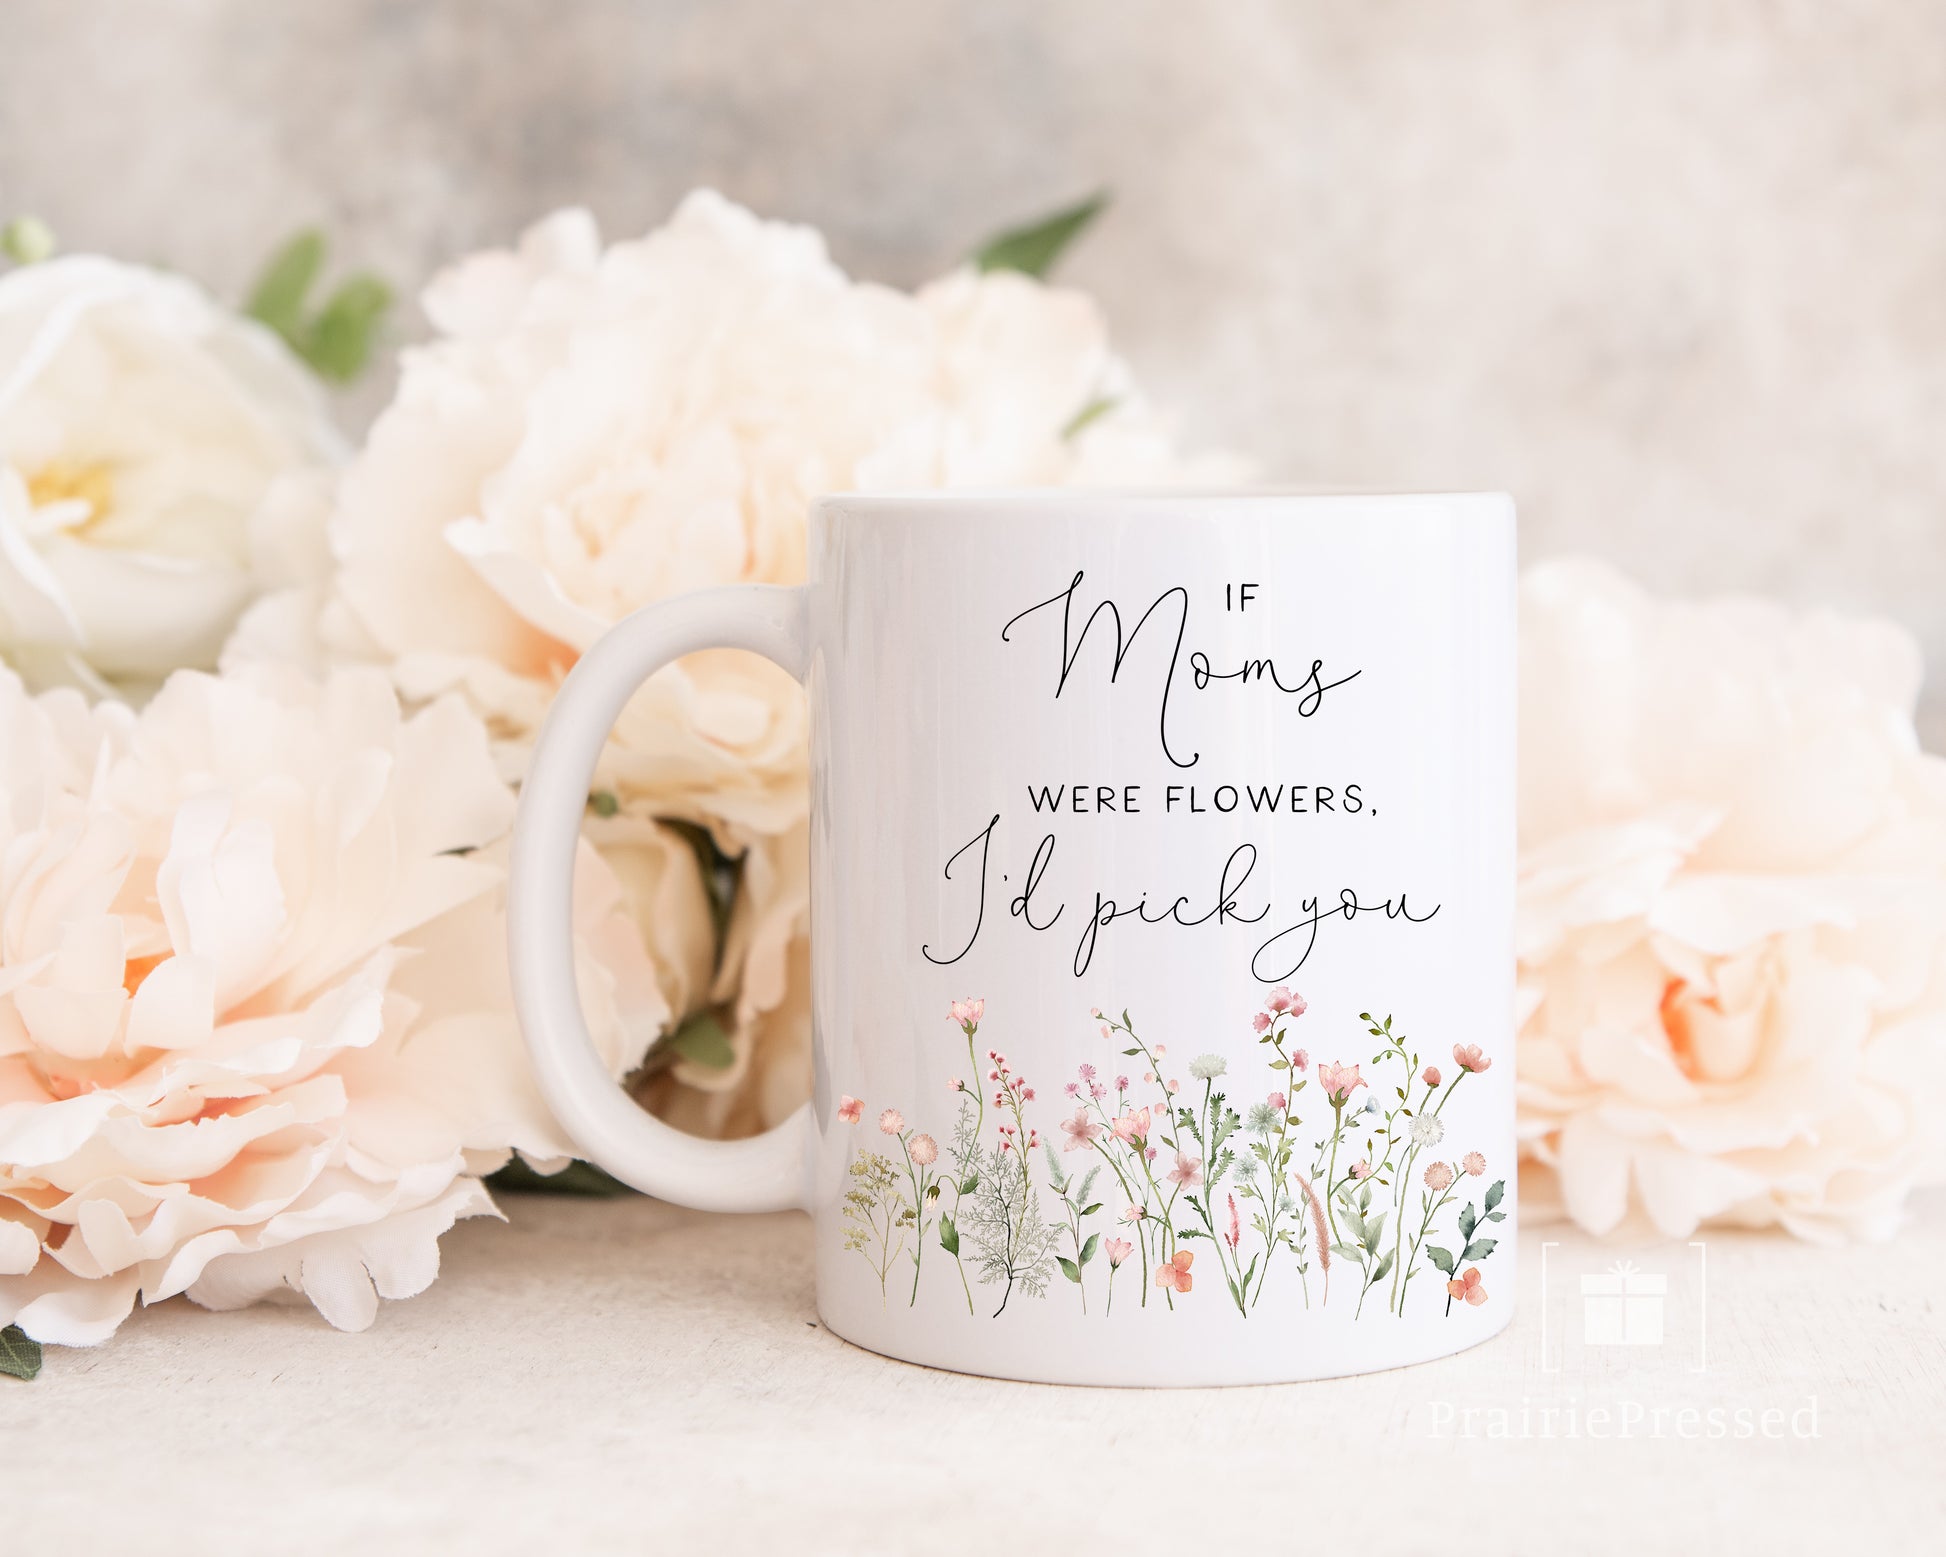 Pretty Ceramic Coffee Mug for Mothers Day. If Moms were Flowers, I'd pick You design with Wildflowers